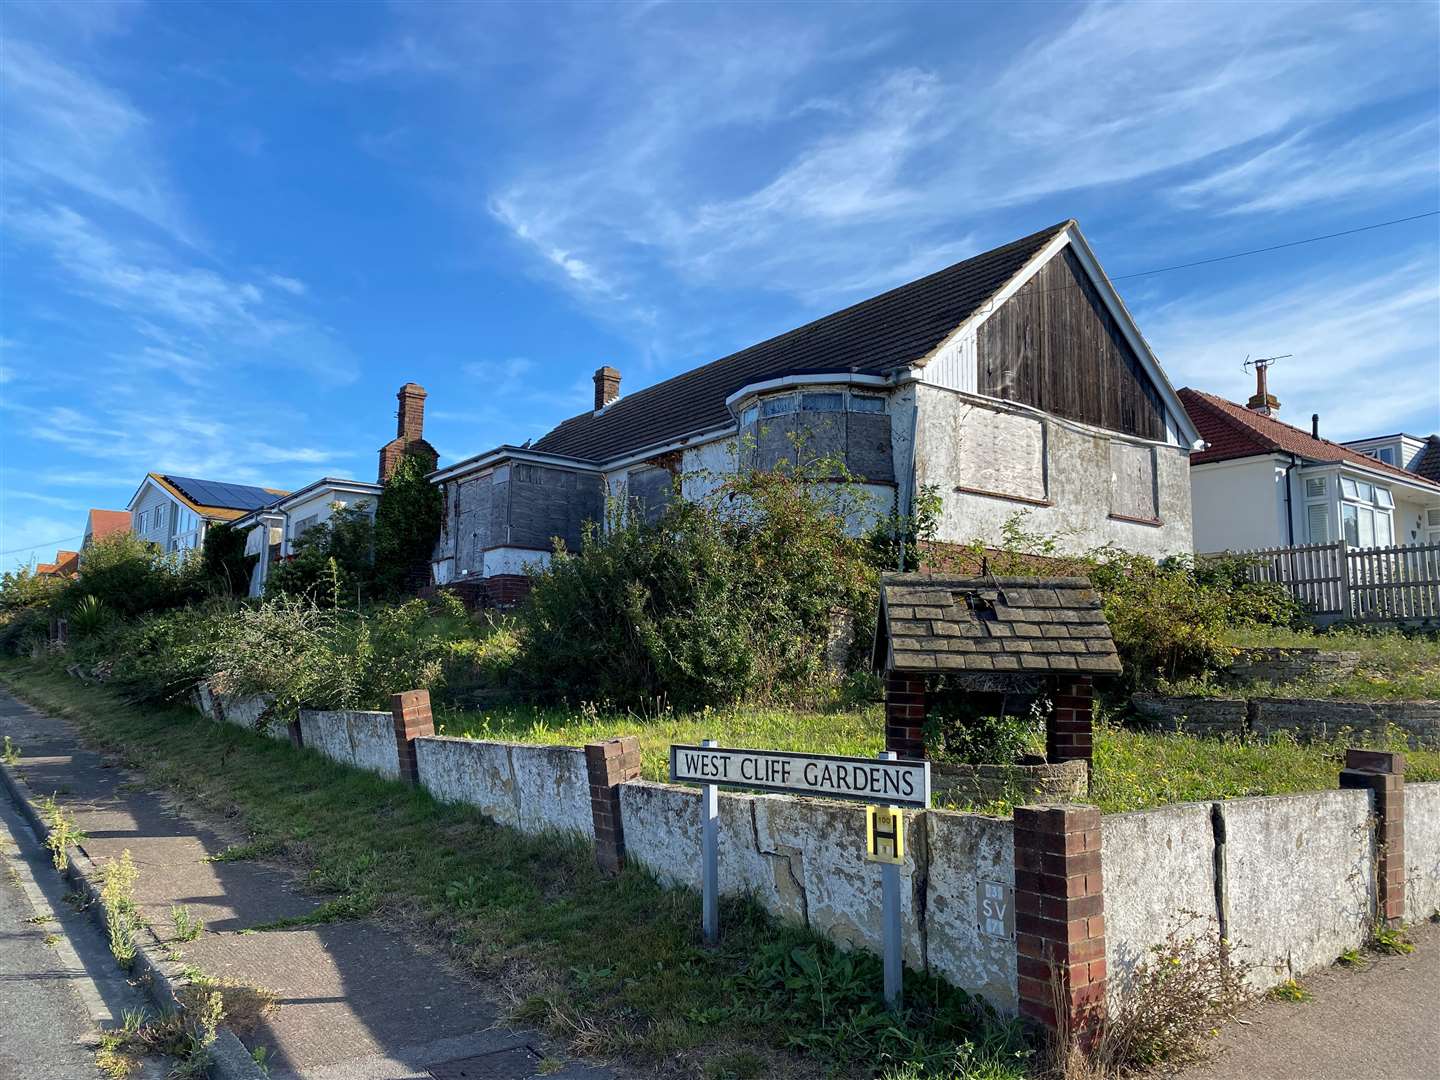 The bungalow in West Cliff Gardens in Herne Bay has been unoccupied for 30 years